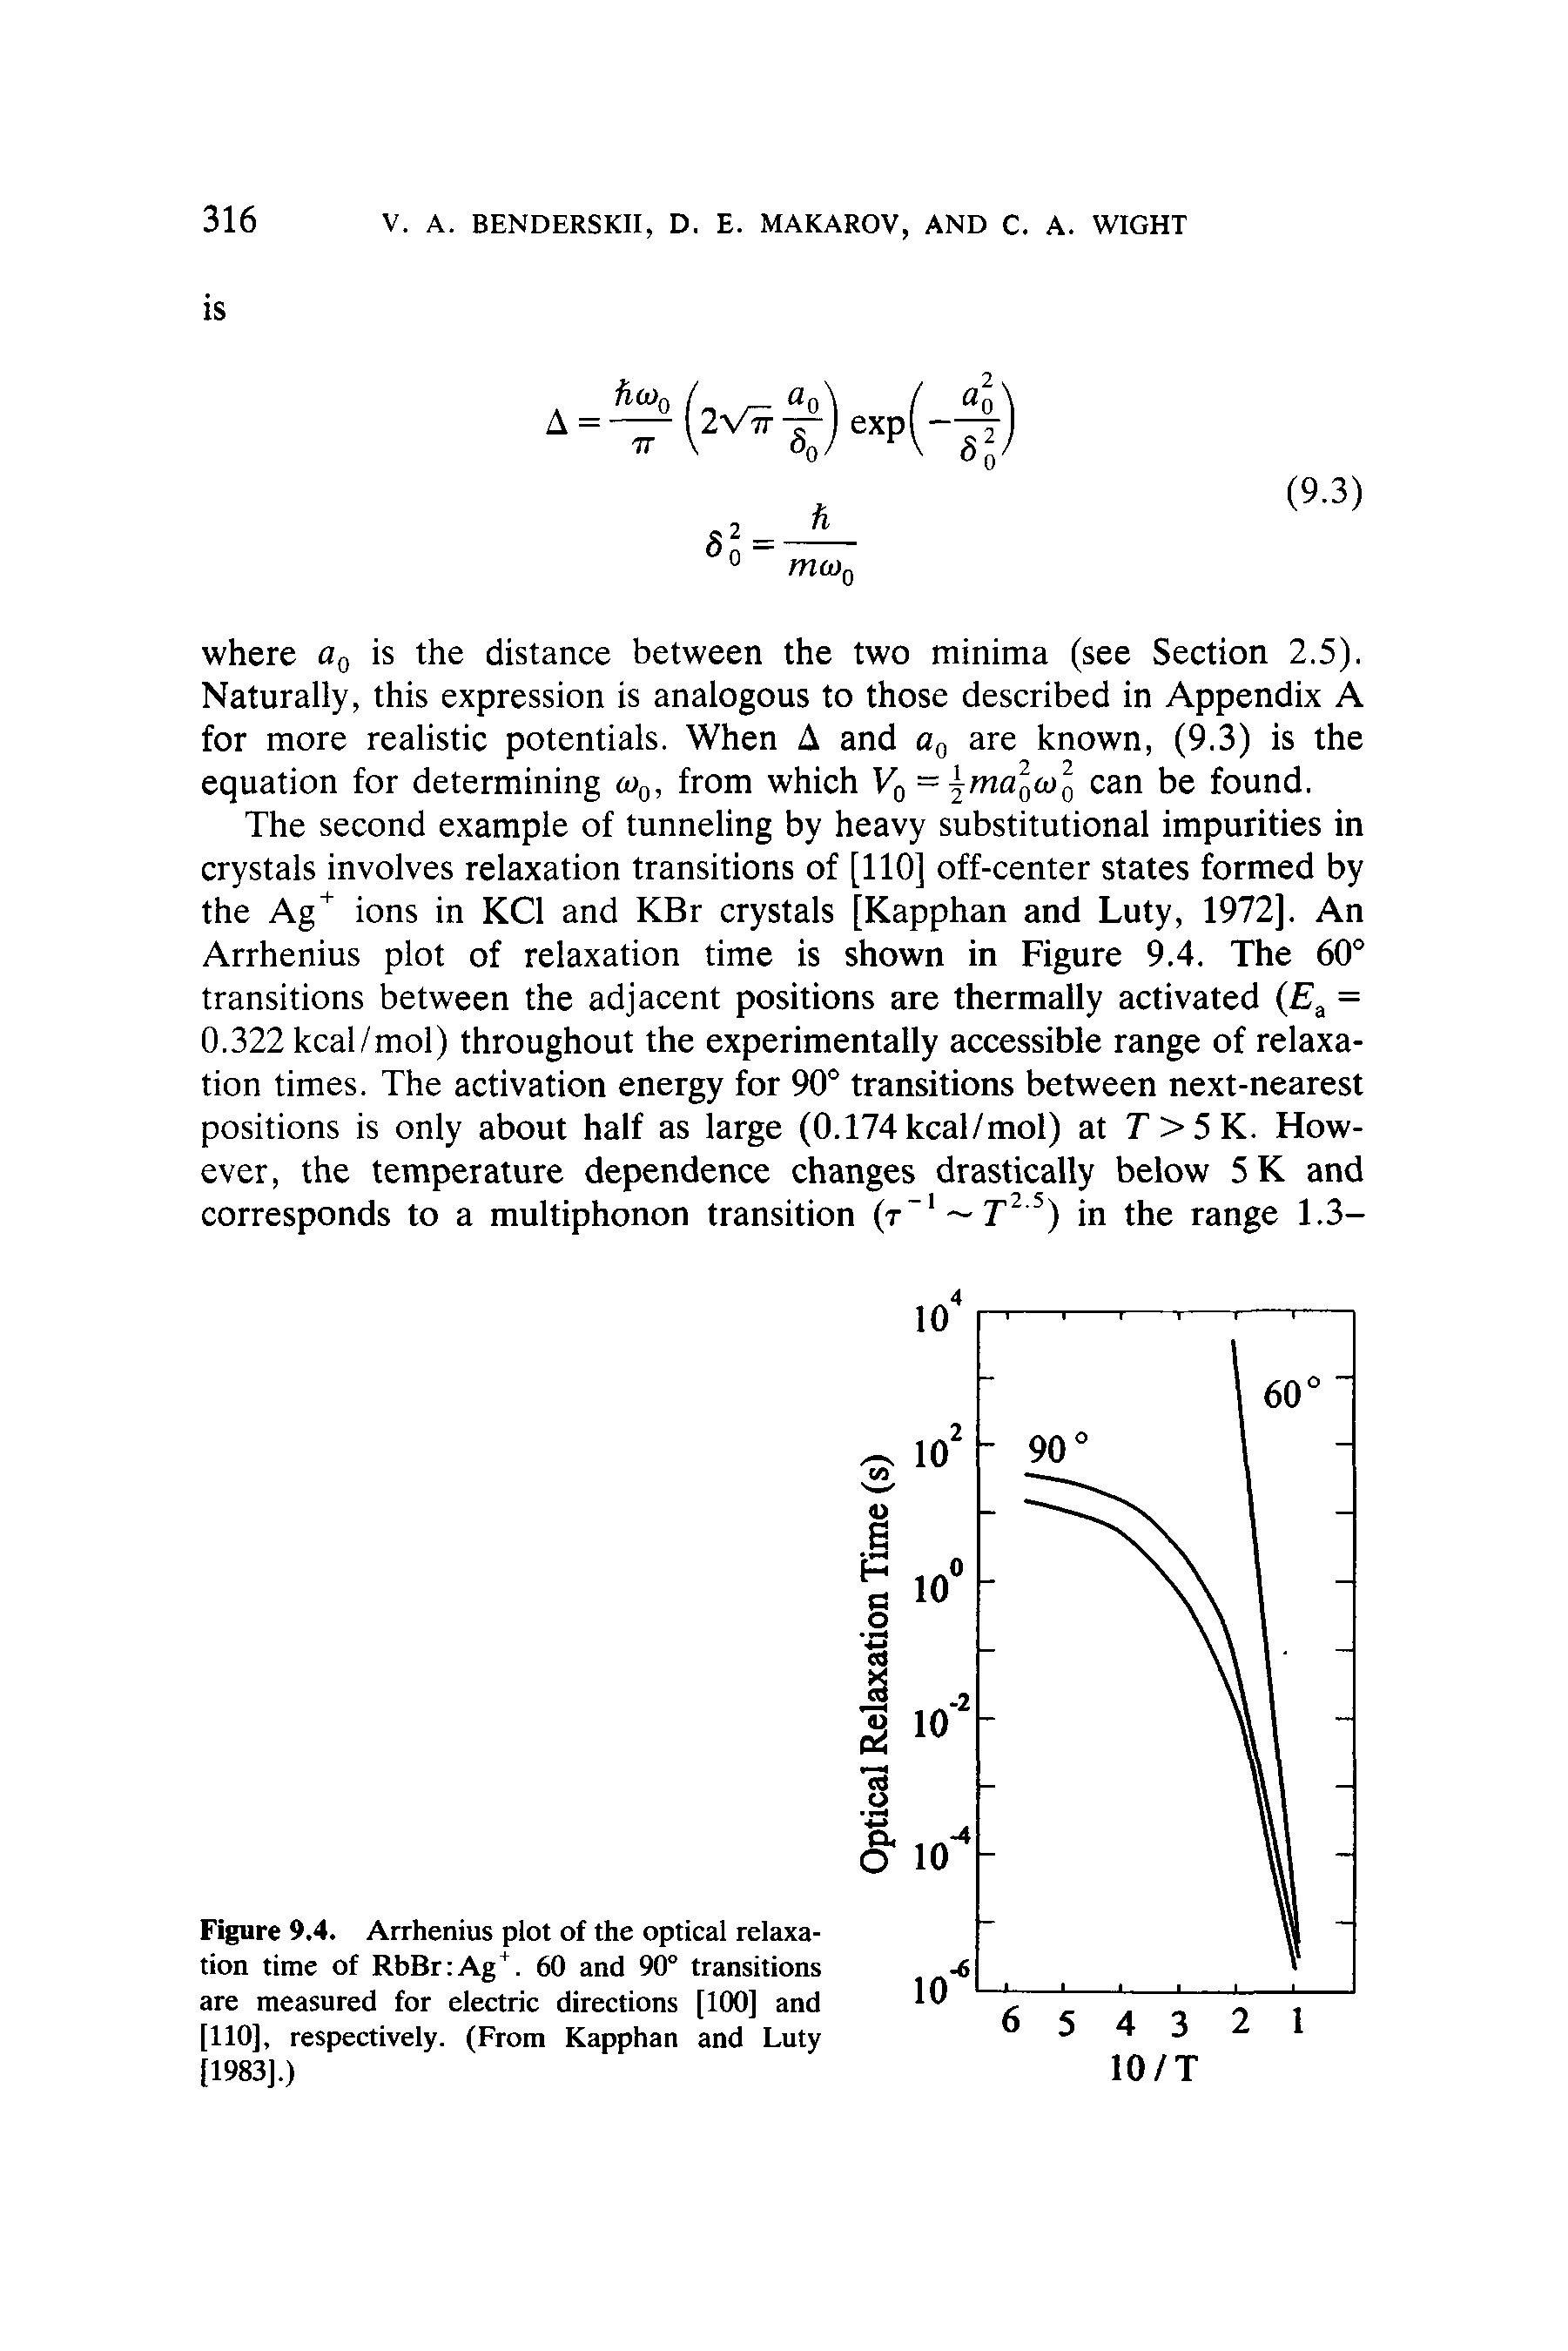 Figure 9.4. Arrhenius plot of the optical relaxation time of RbBr Ag+. 60 and 90° transitions are measured for electric directions [100] and [110], respectively. (From Kapphan and Luty [1983].)...